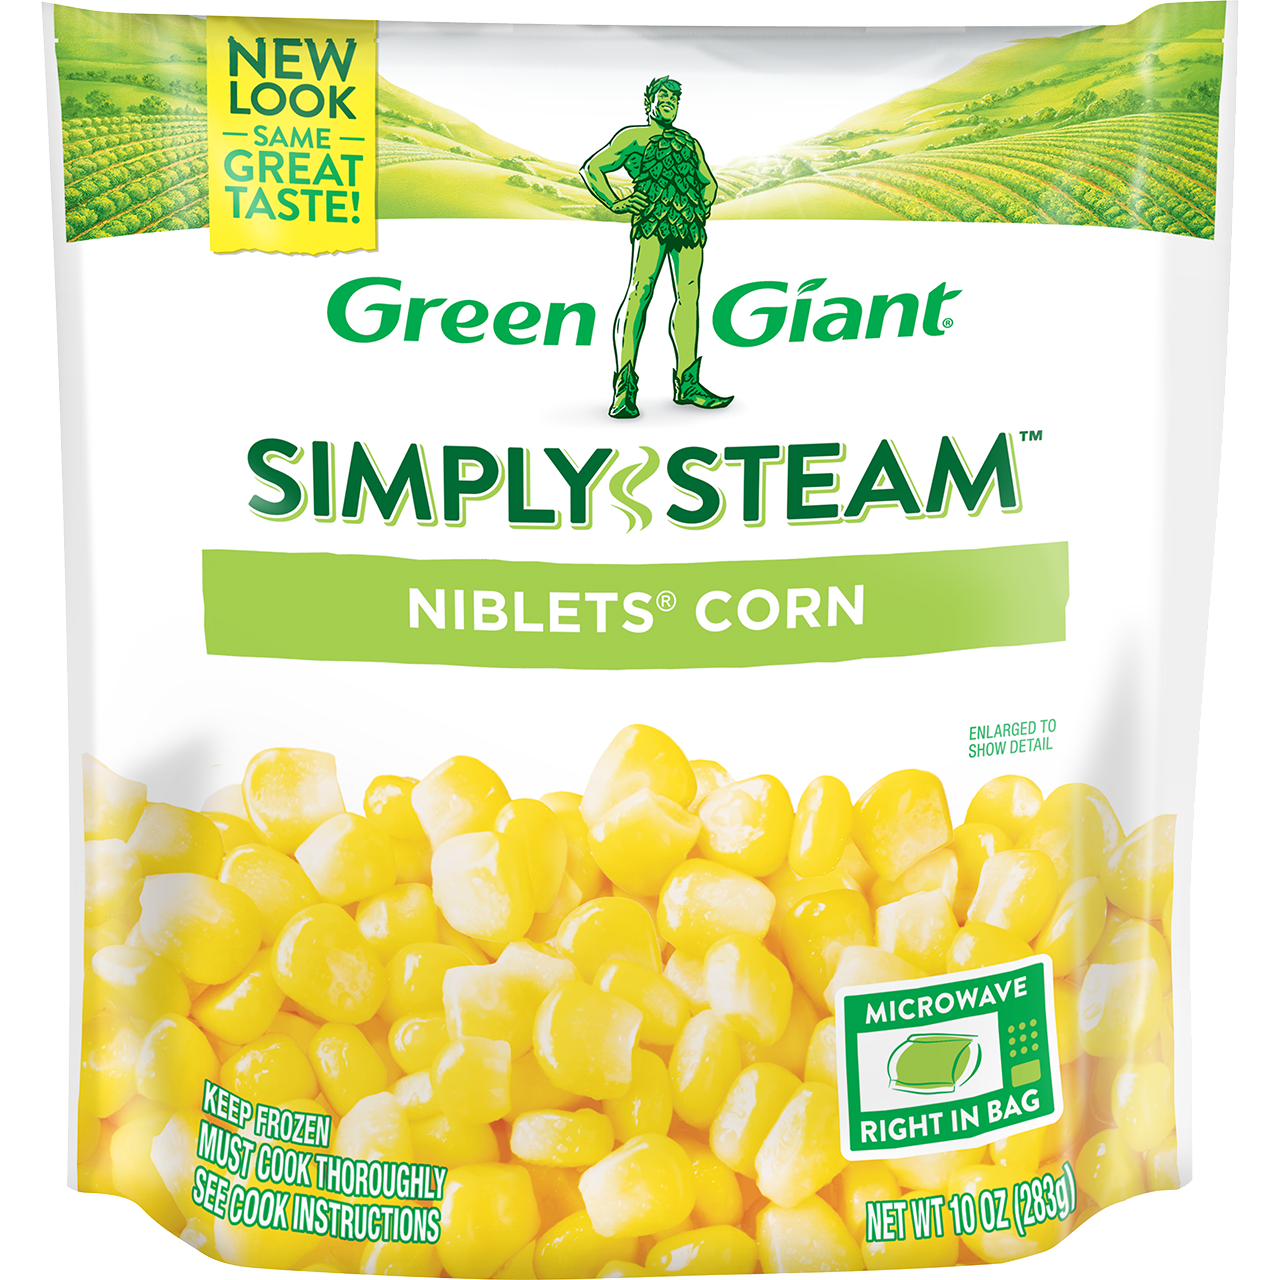 GREEN GIANT SIMPLY STEAM NIBBLETS CORN 10 OZ